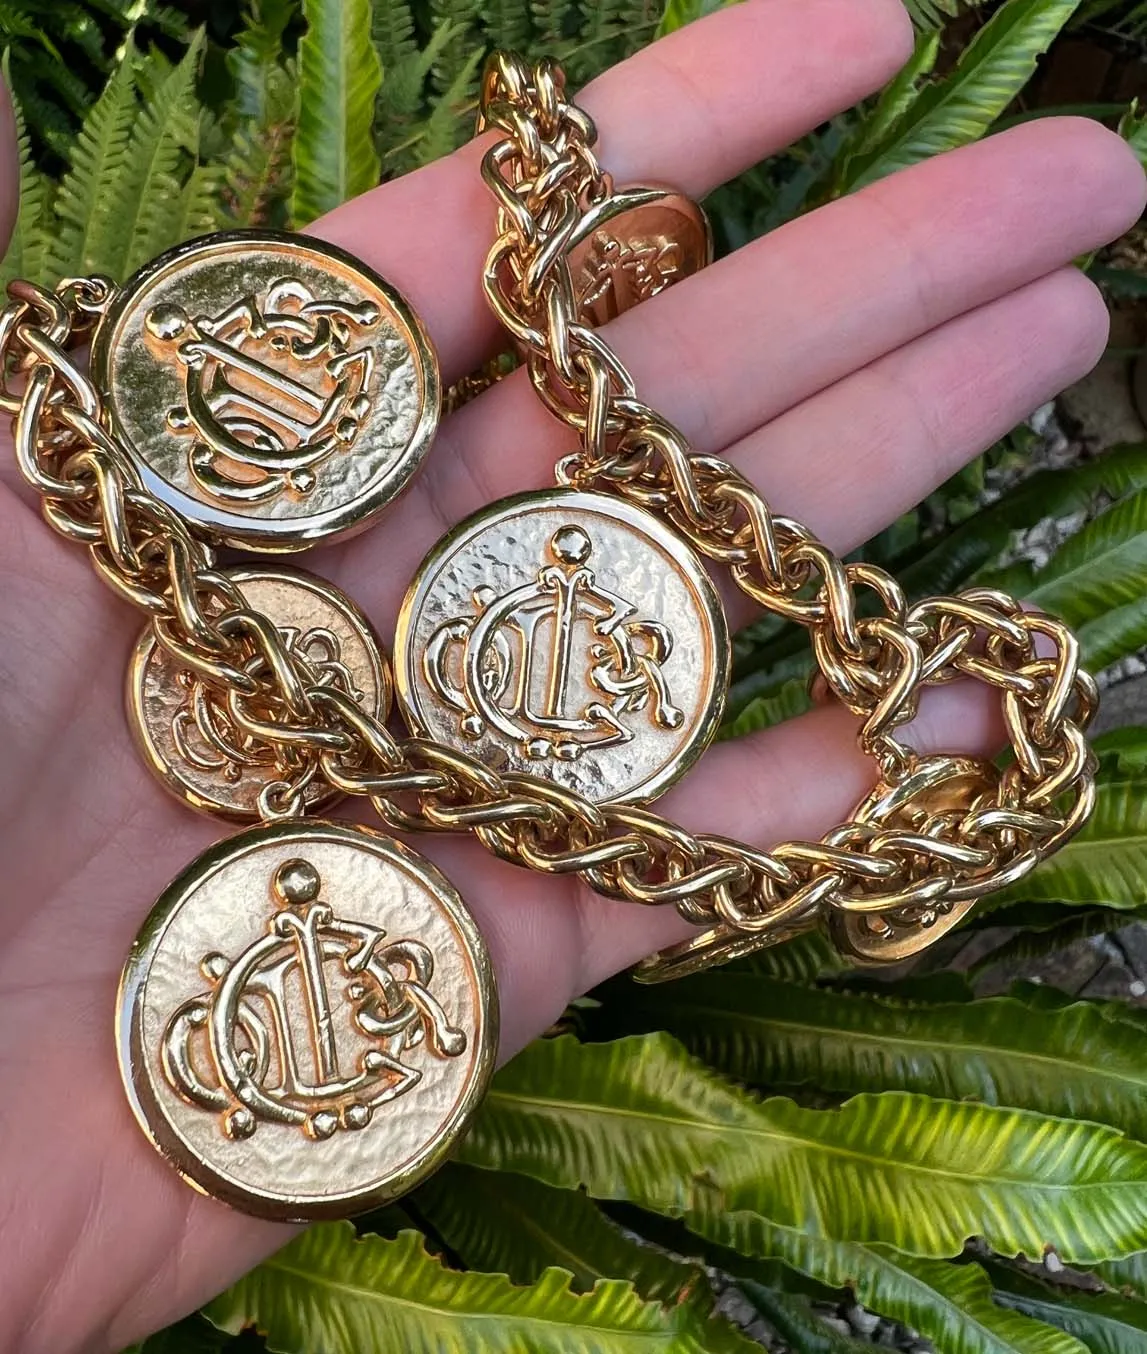 Gold plated heavy link chain with coin charms showing the Christian Dior logo held in a hand with green background